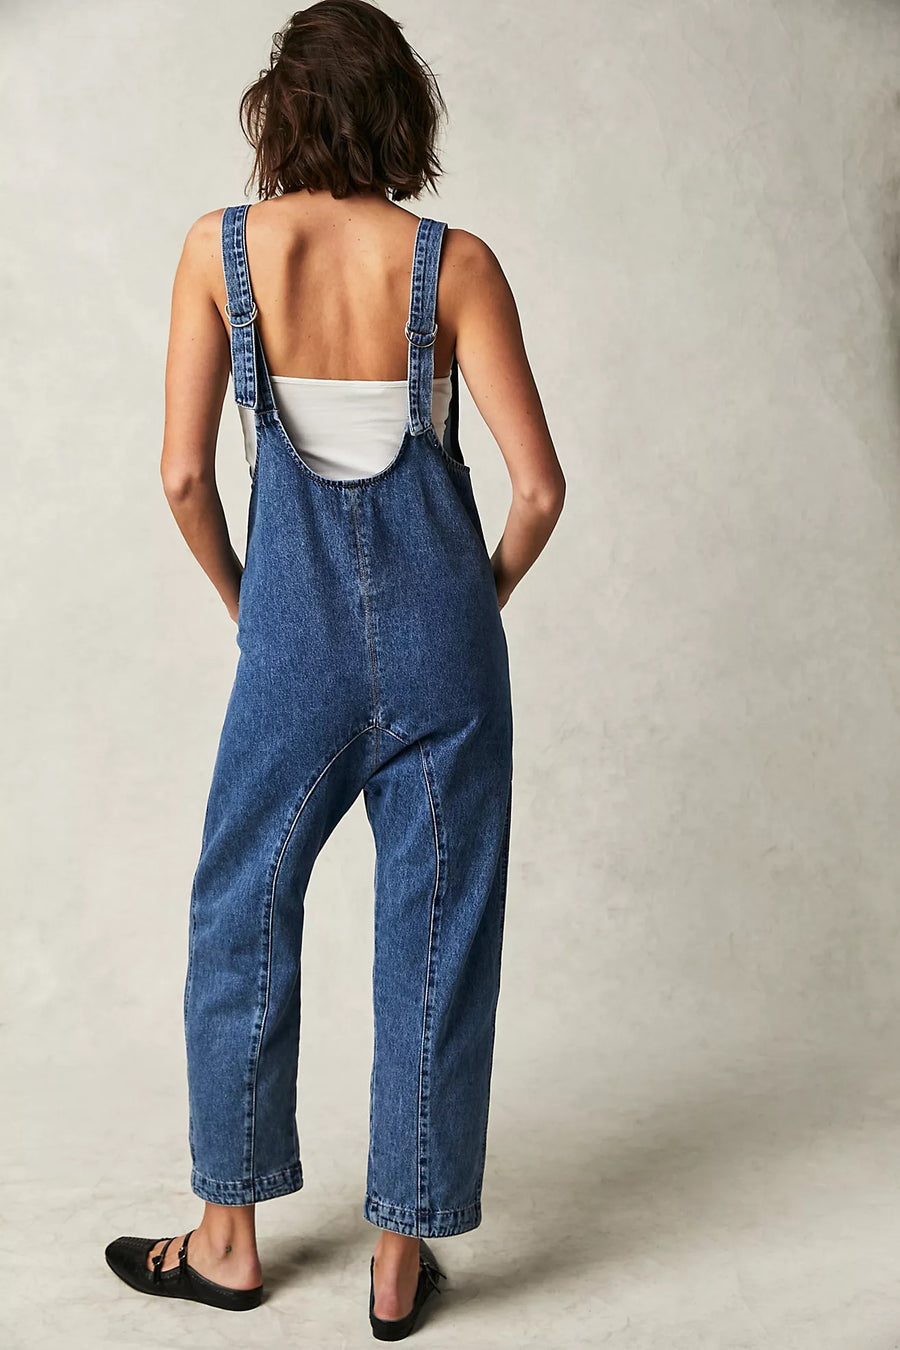 Free People High Roller Jumpsuit - Sapphire Blue